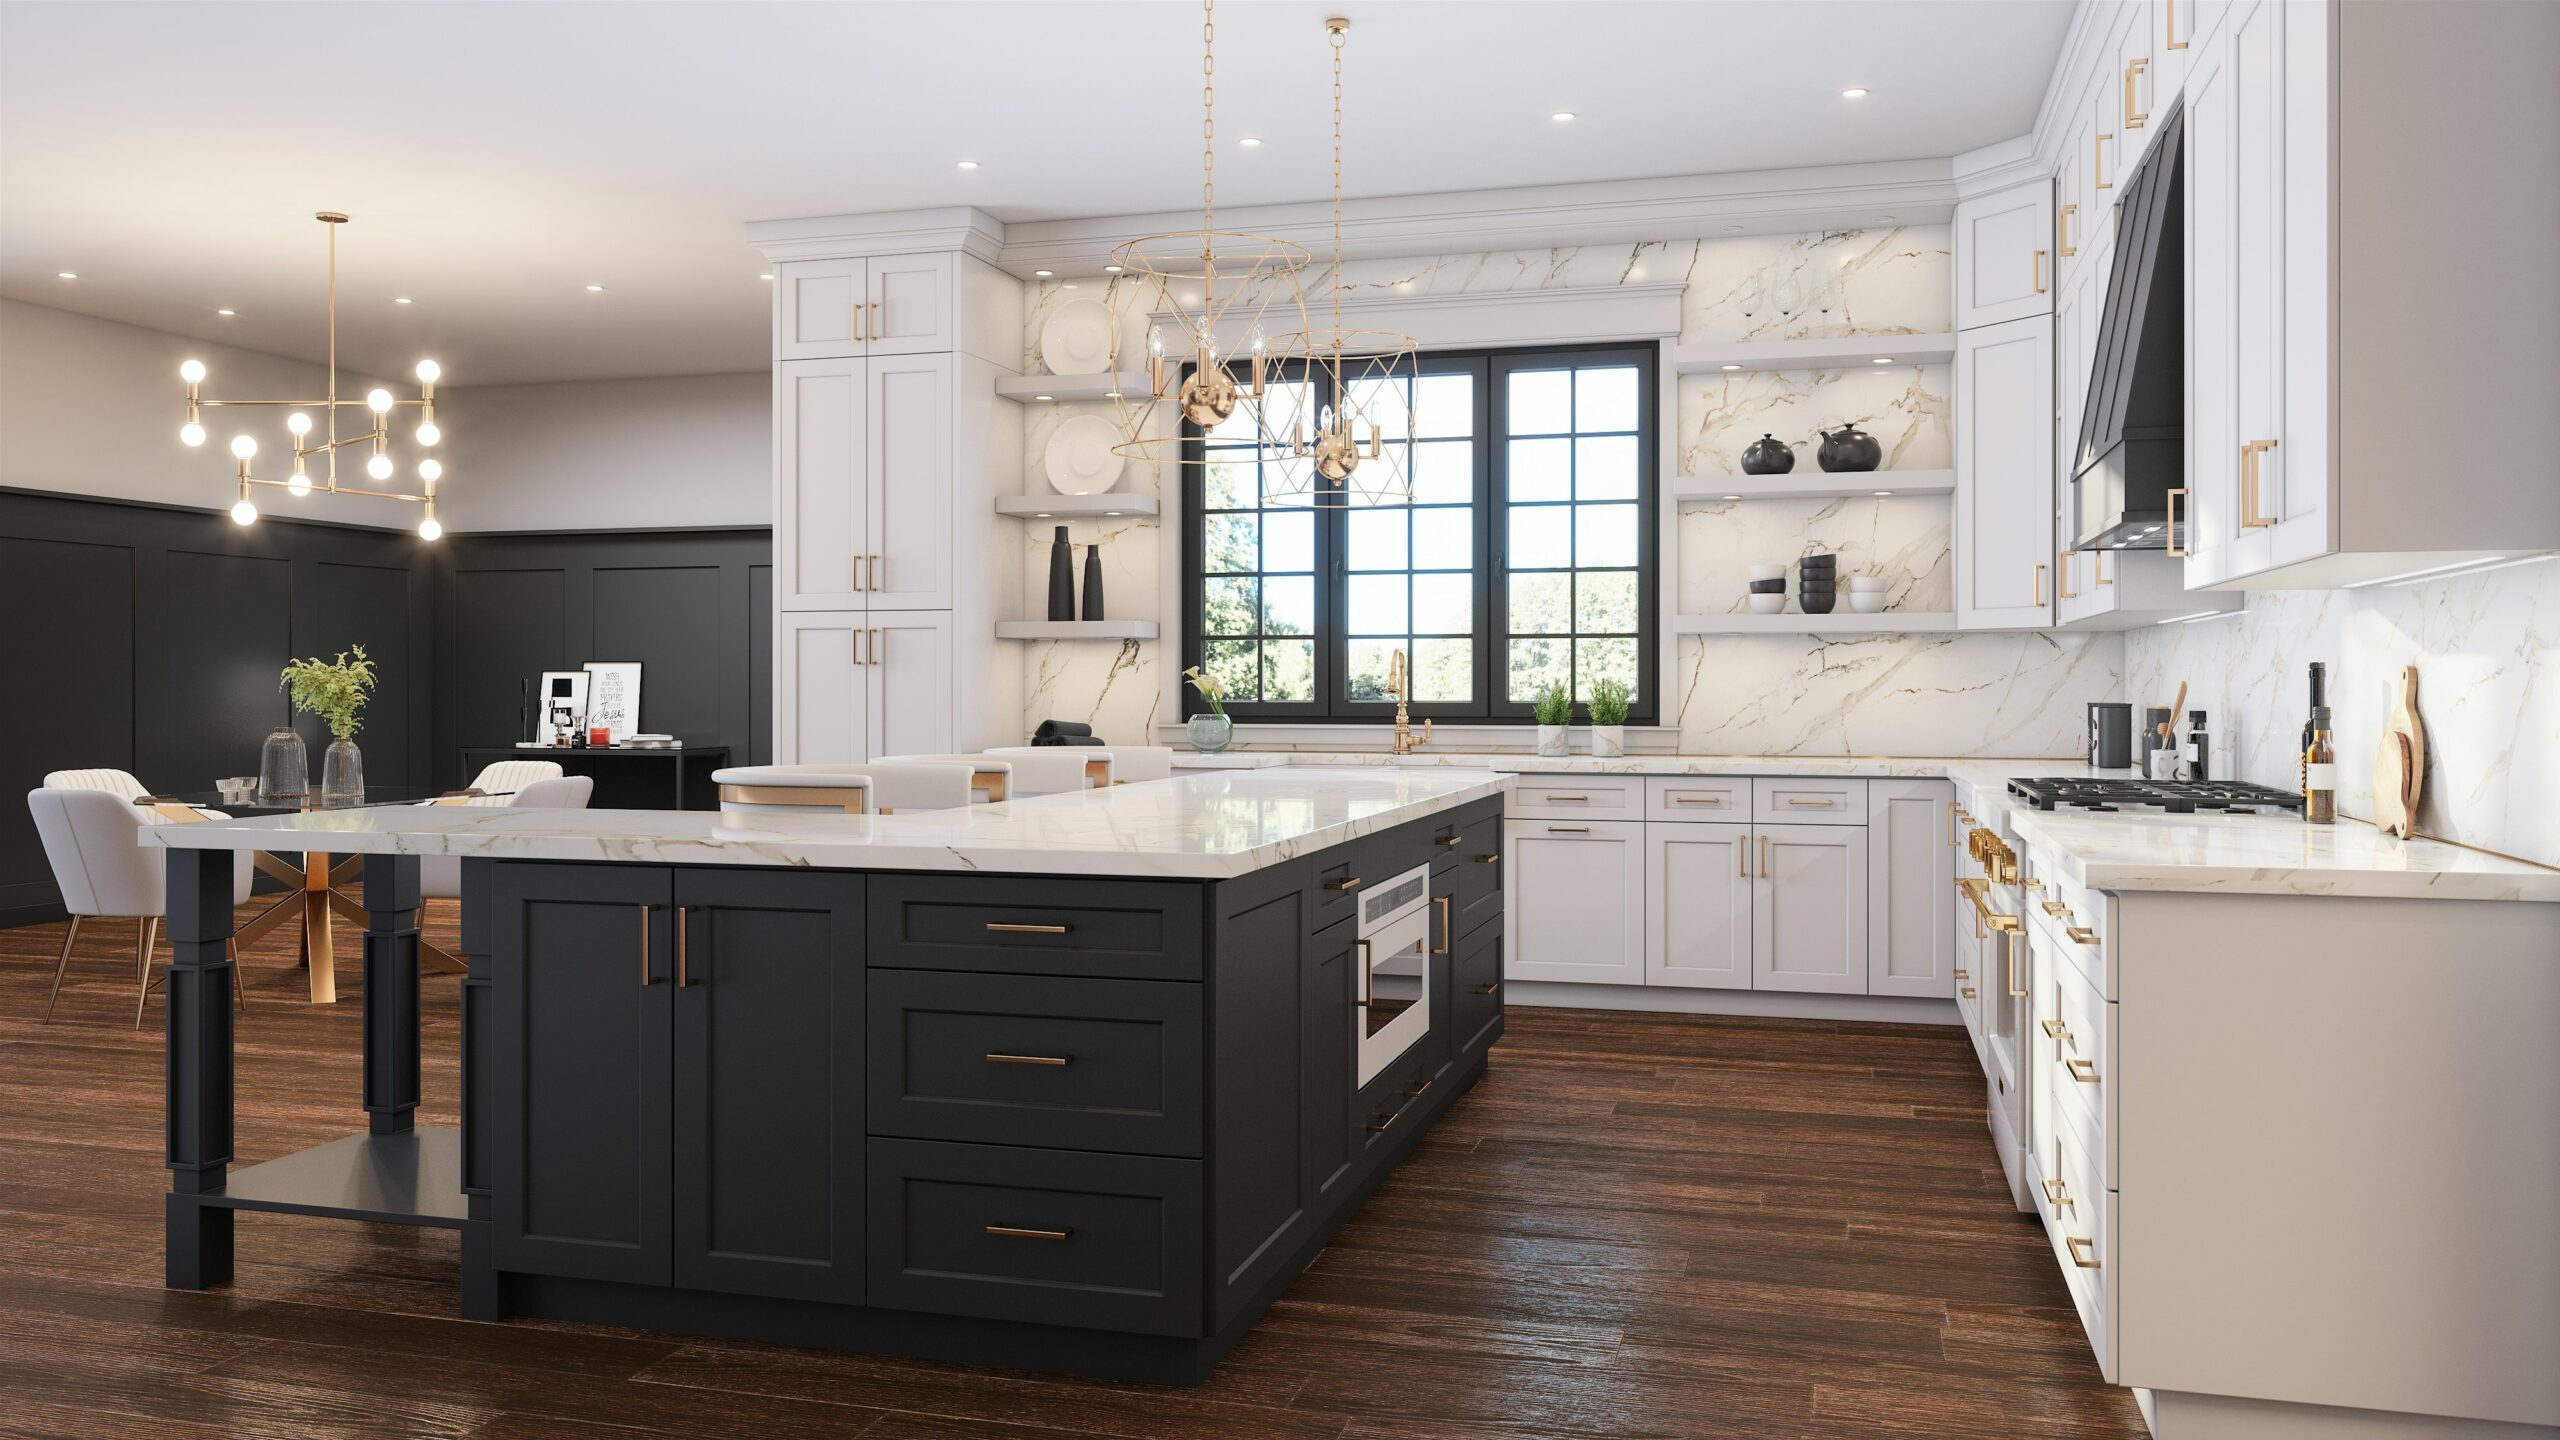 Tailored Series Shaker Cabinetry - Island in Black, Perimeter in Whte